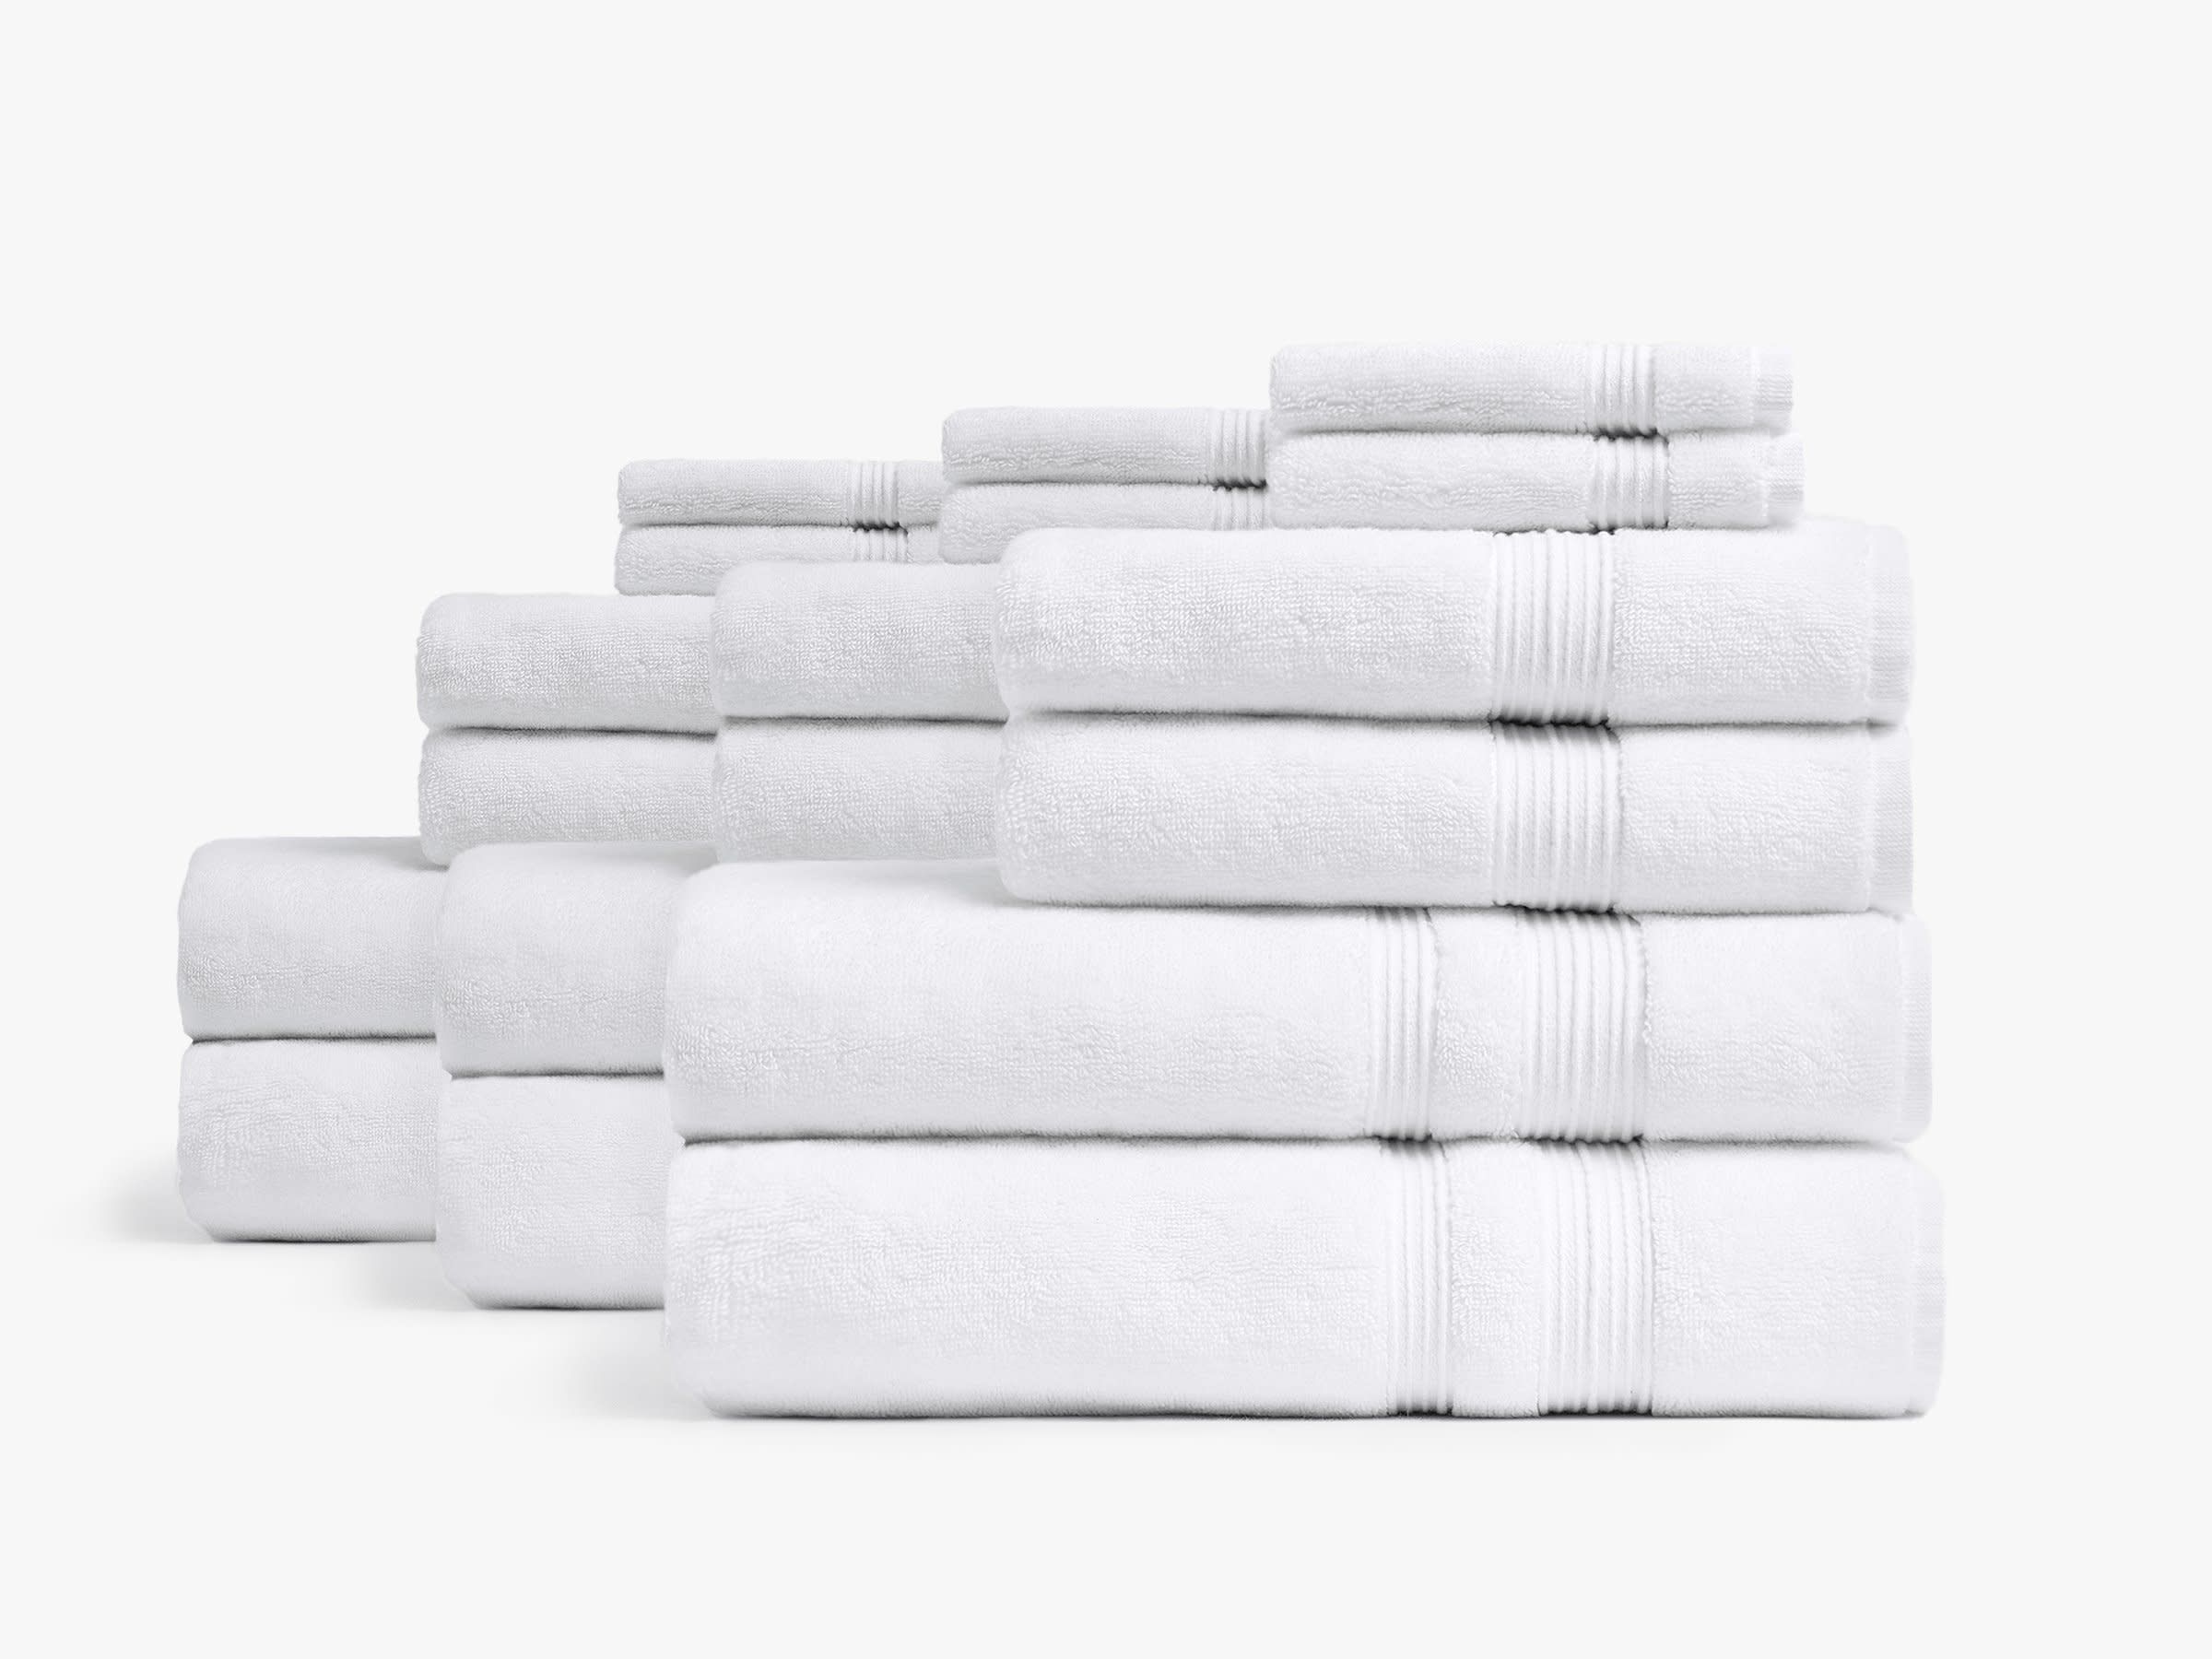 White bath towel set folded and stacked with bath towels, hand towels and washclothes on a white background